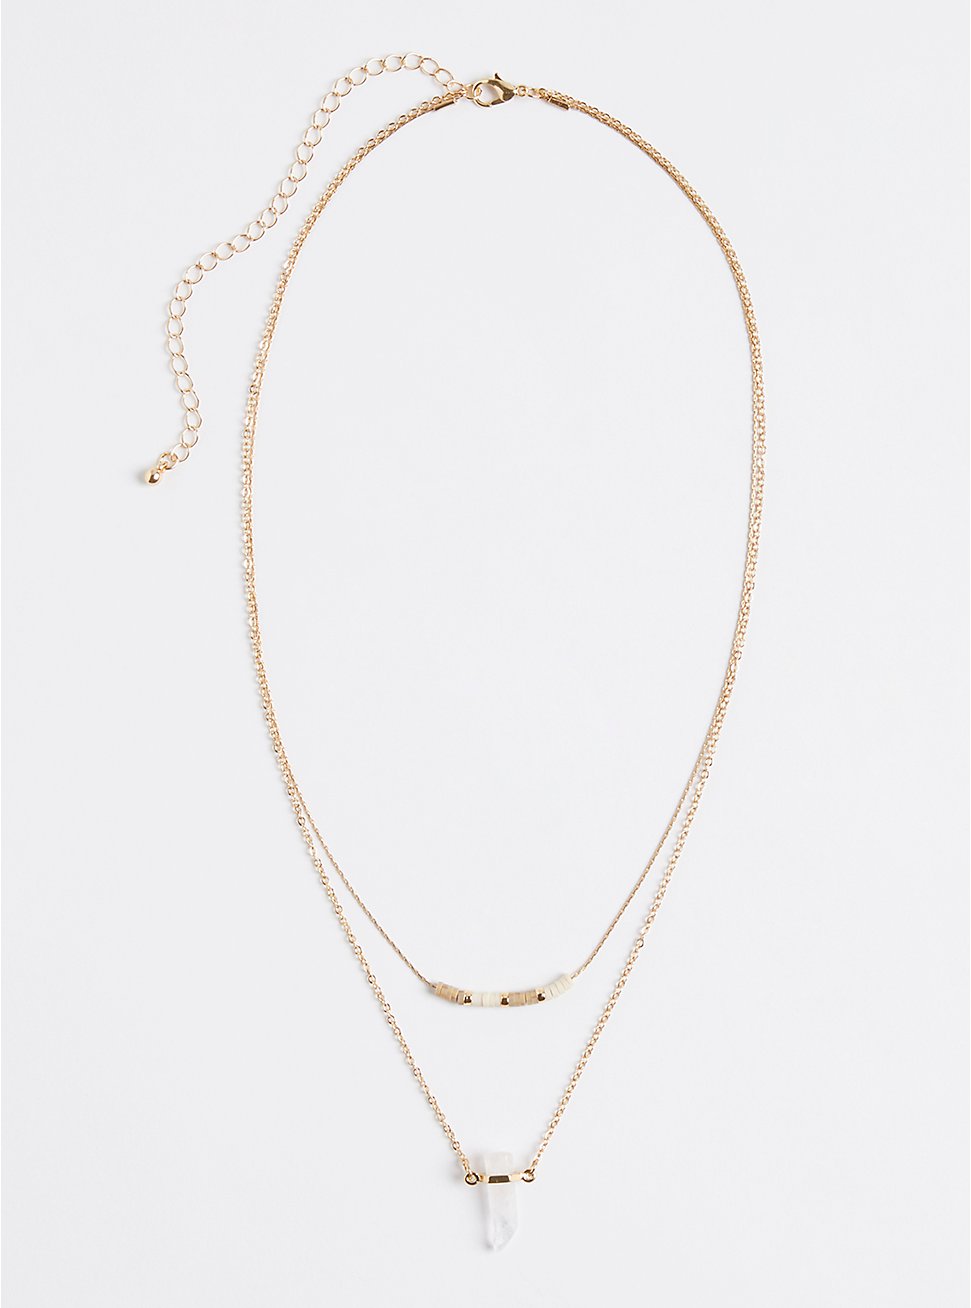 Plus Size Gold Tone Layered Necklace With Beads And Quartz, , hi-res